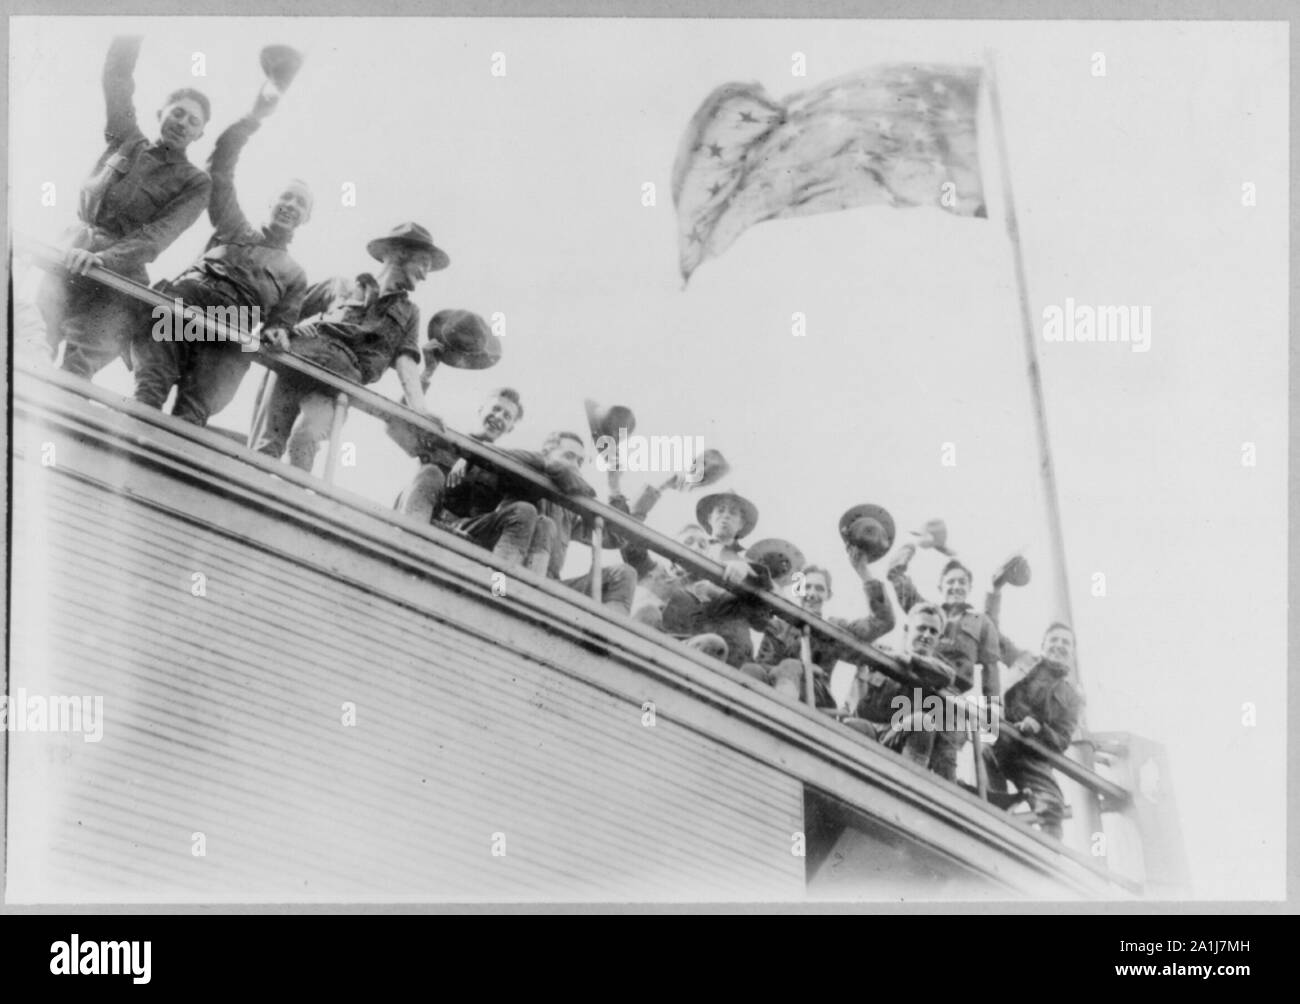 N.Y. National Guard training and maneuvers at Fishkill and Peekskill, N.Y.: Men waving from railing of ferry enroute to Fishkill Stock Photo